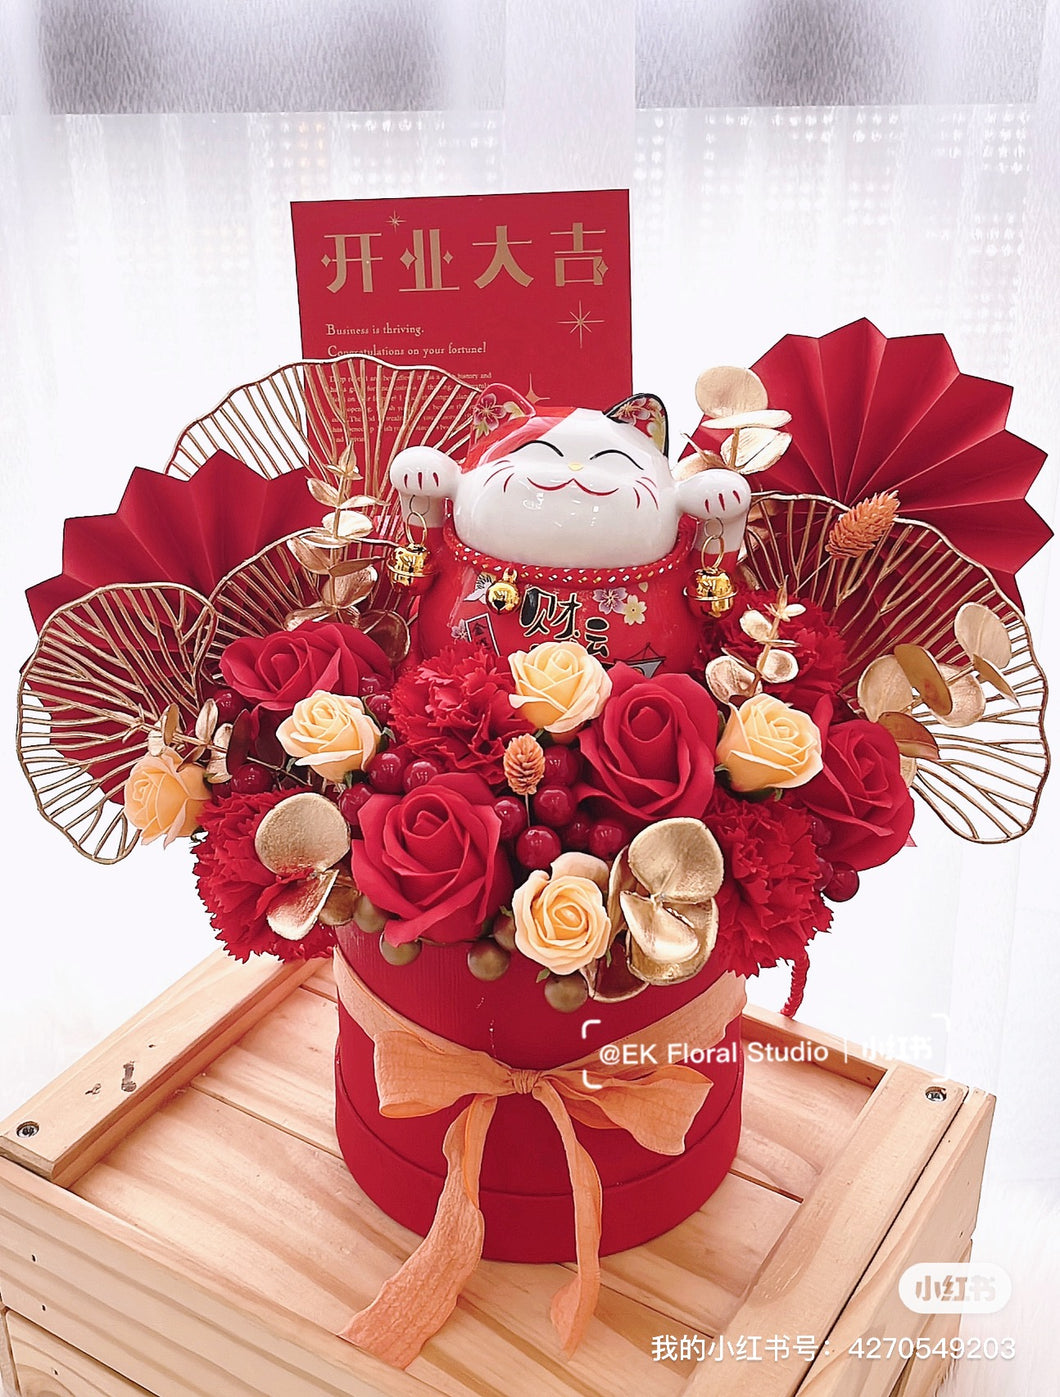 Go-Luck Soap Flower Bucket with Fortune Cat 好运来招财猫香皂开业花桶